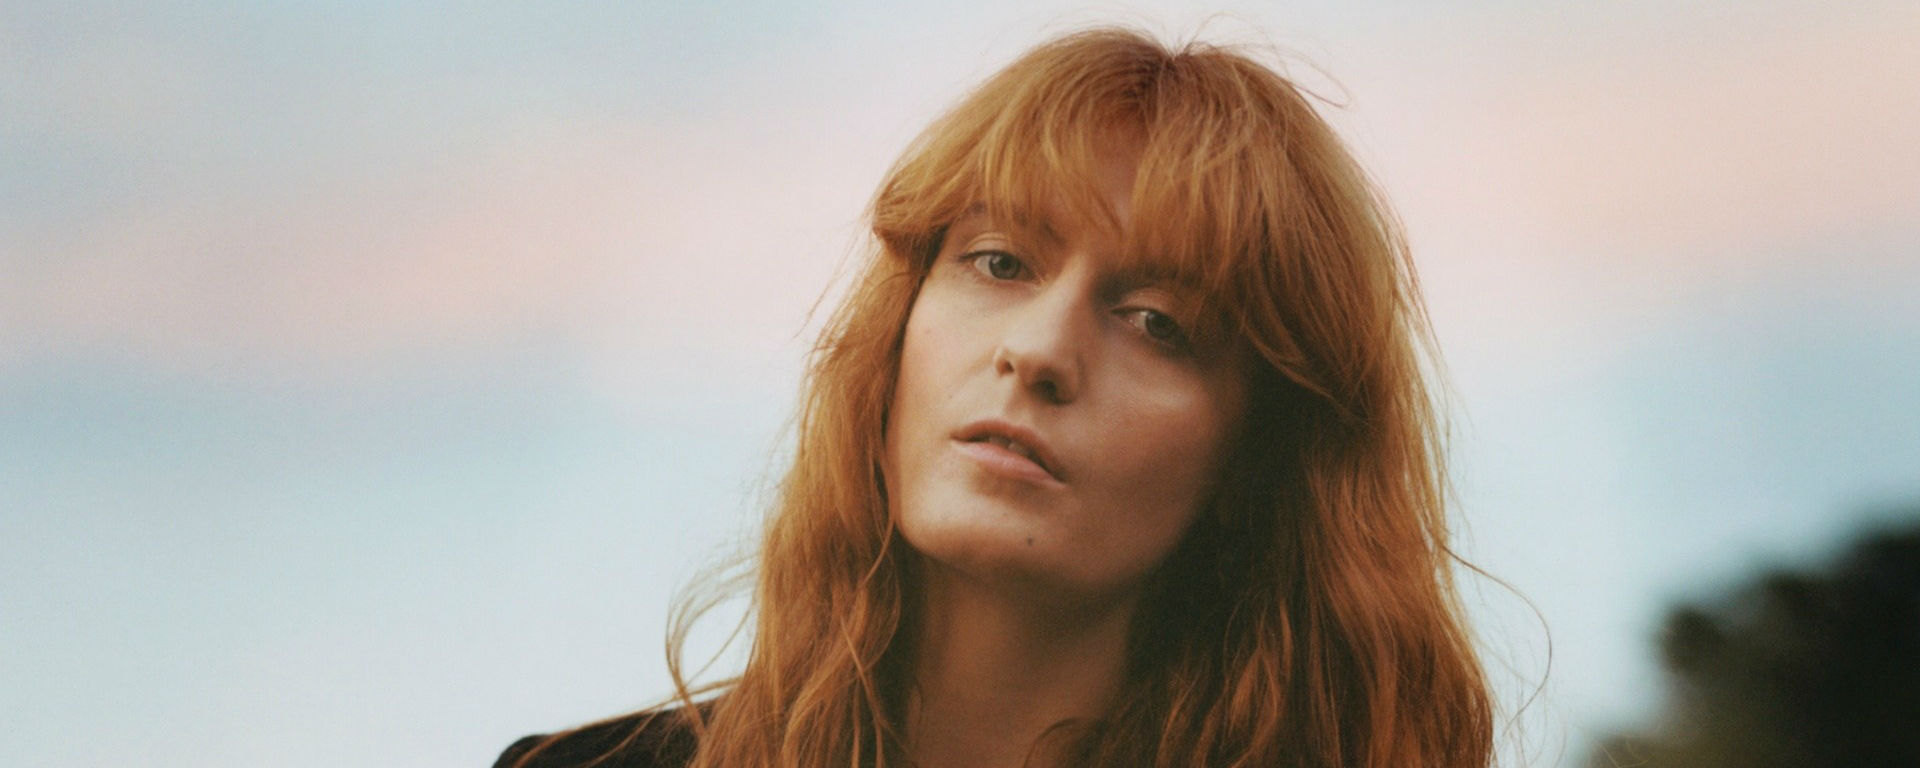 Florence Welch to Score Broadway Musical  “The Great Gatsby”